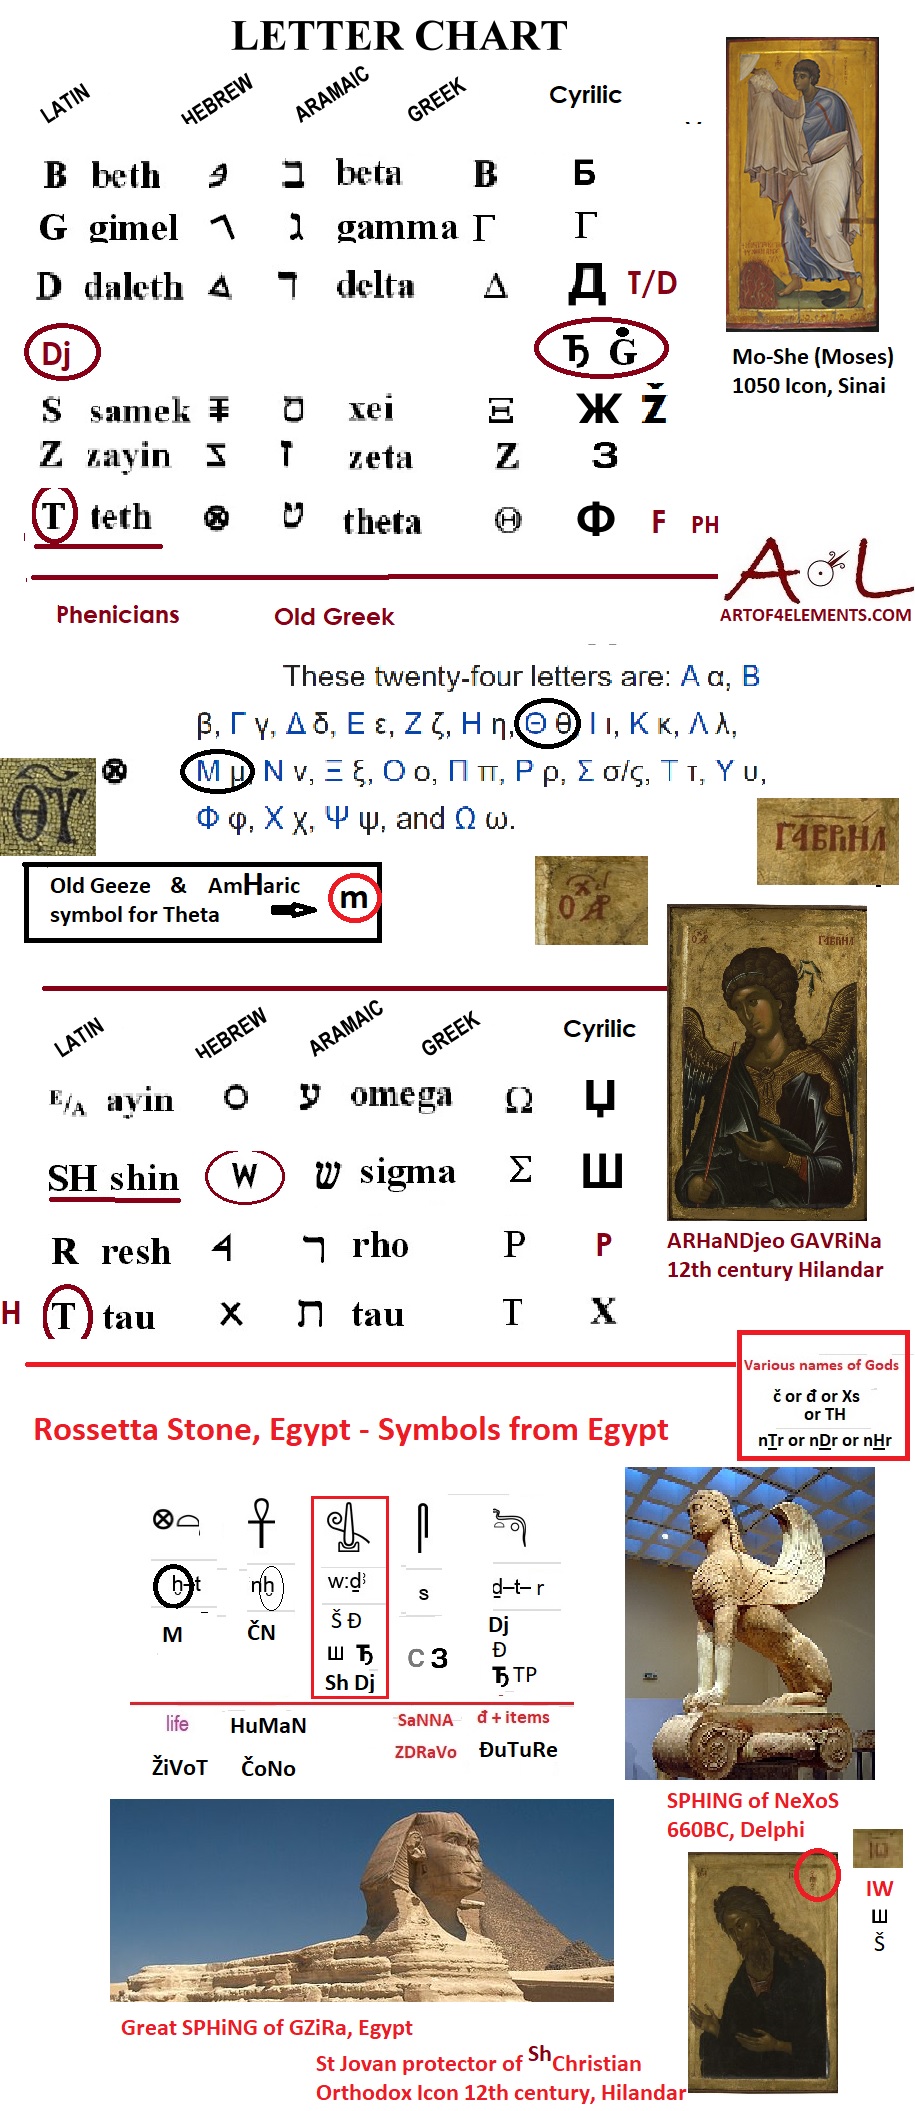 ancient-egypt-mystical-knowledge-and-first-aphabete-letters-chart